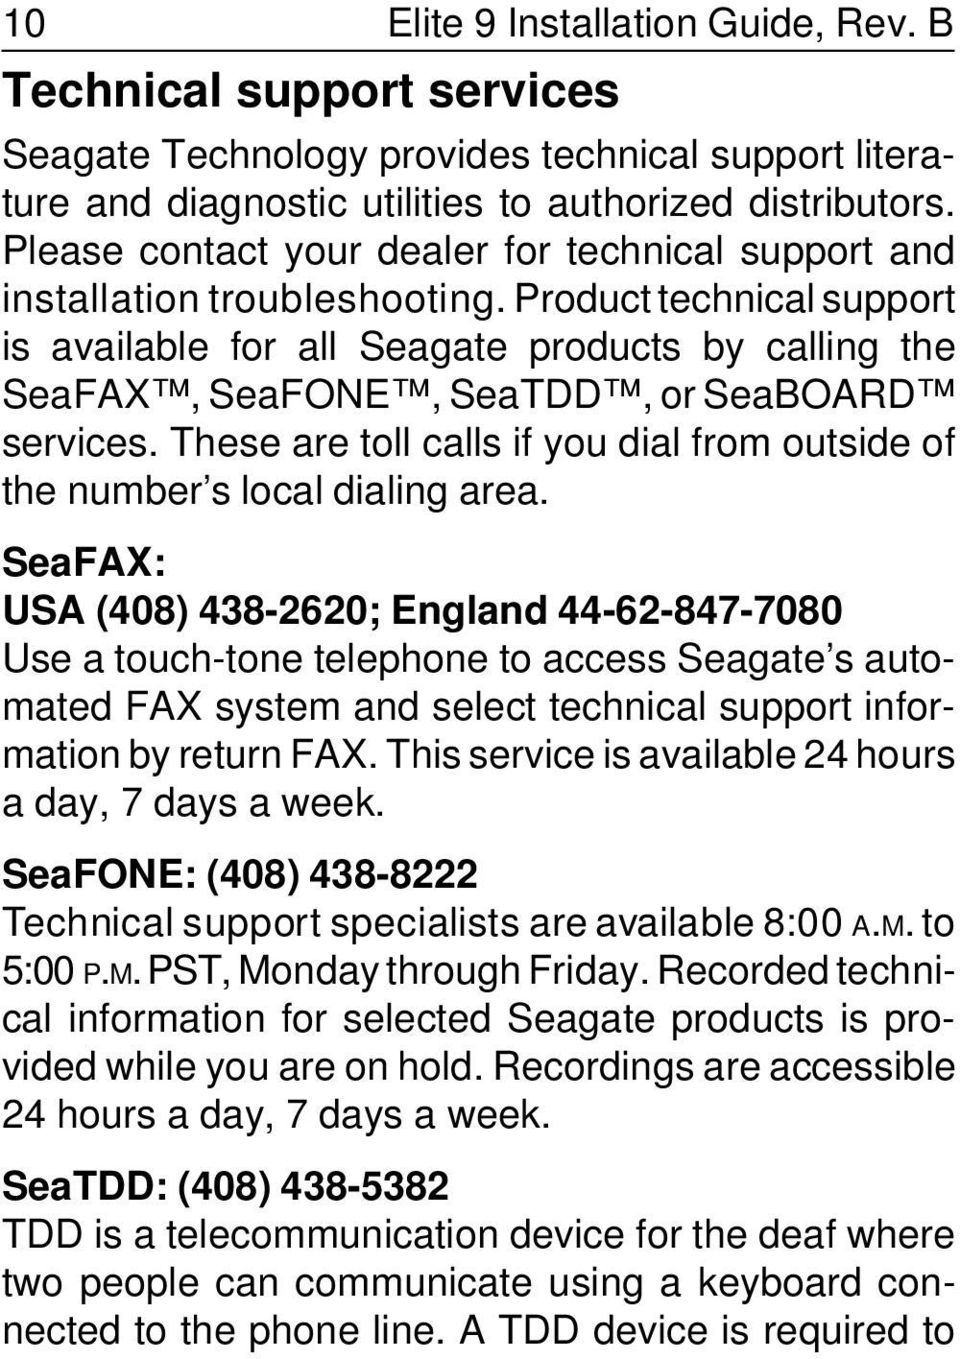 Product technical support is available for all Seagate products by calling the SeaFAX, SeaFONE, SeaTDD, or SeaBOARD services.